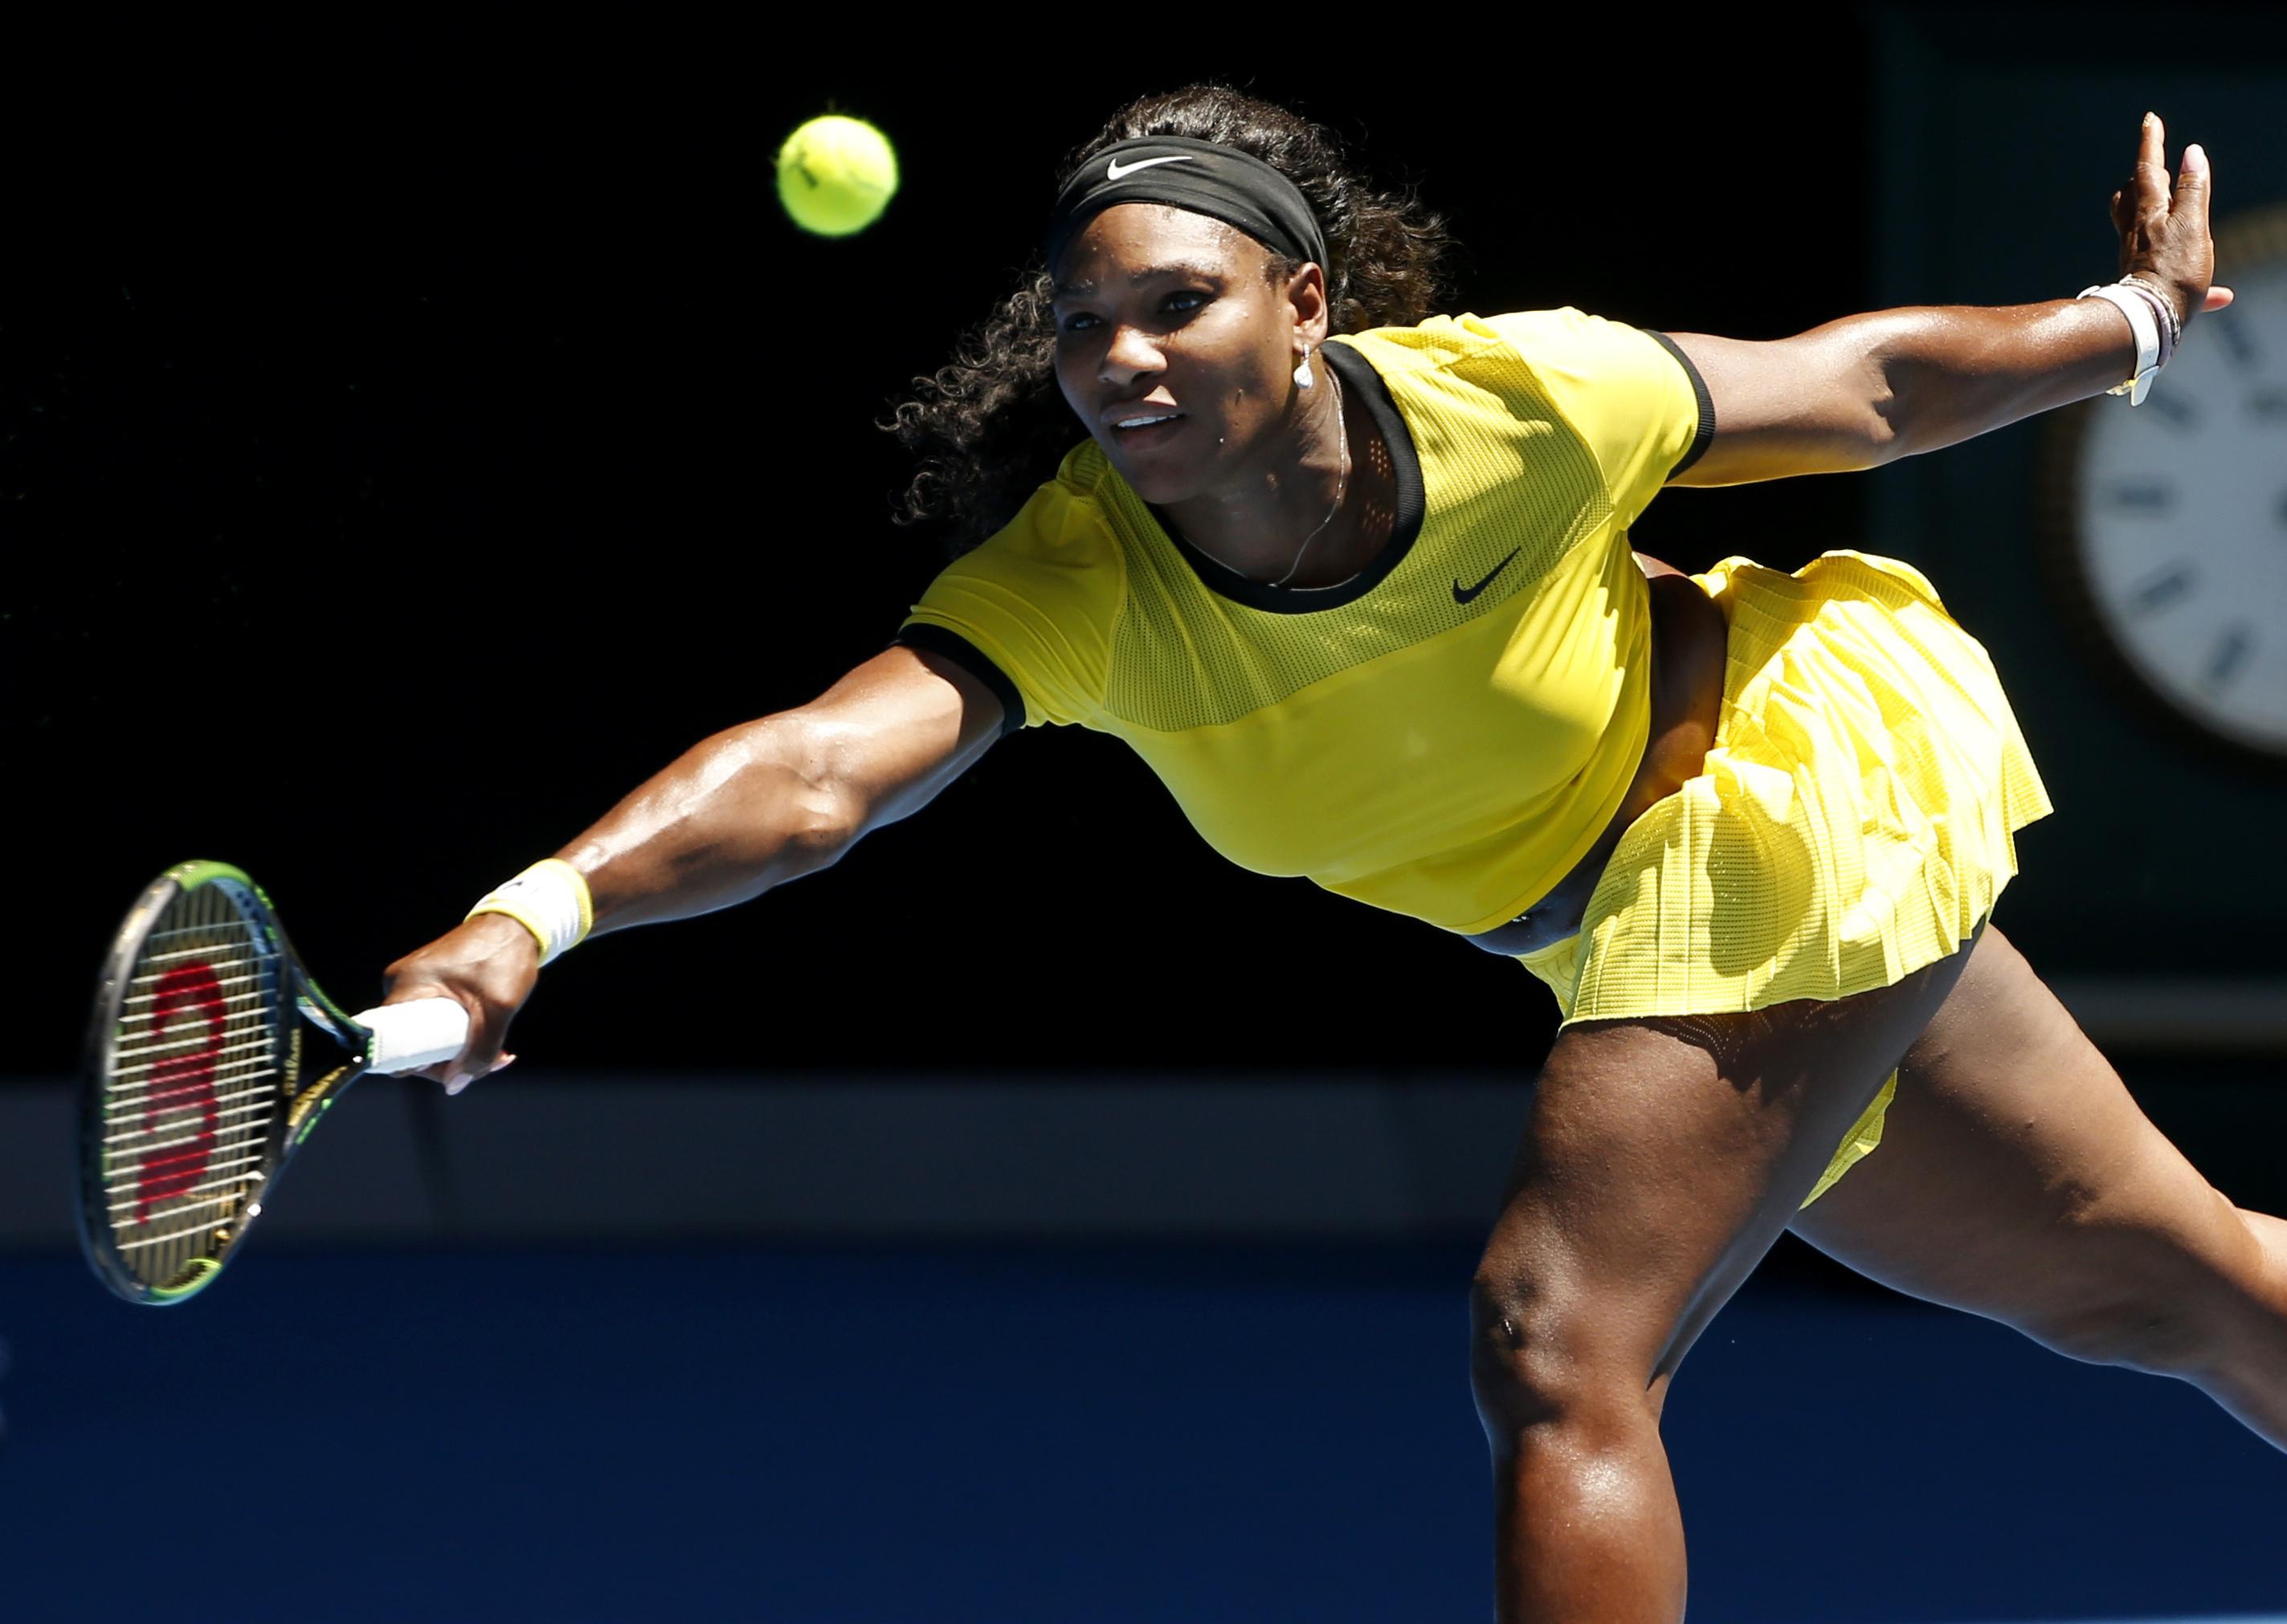 Serena Williams Wallpaper Image Photos Pictures Background